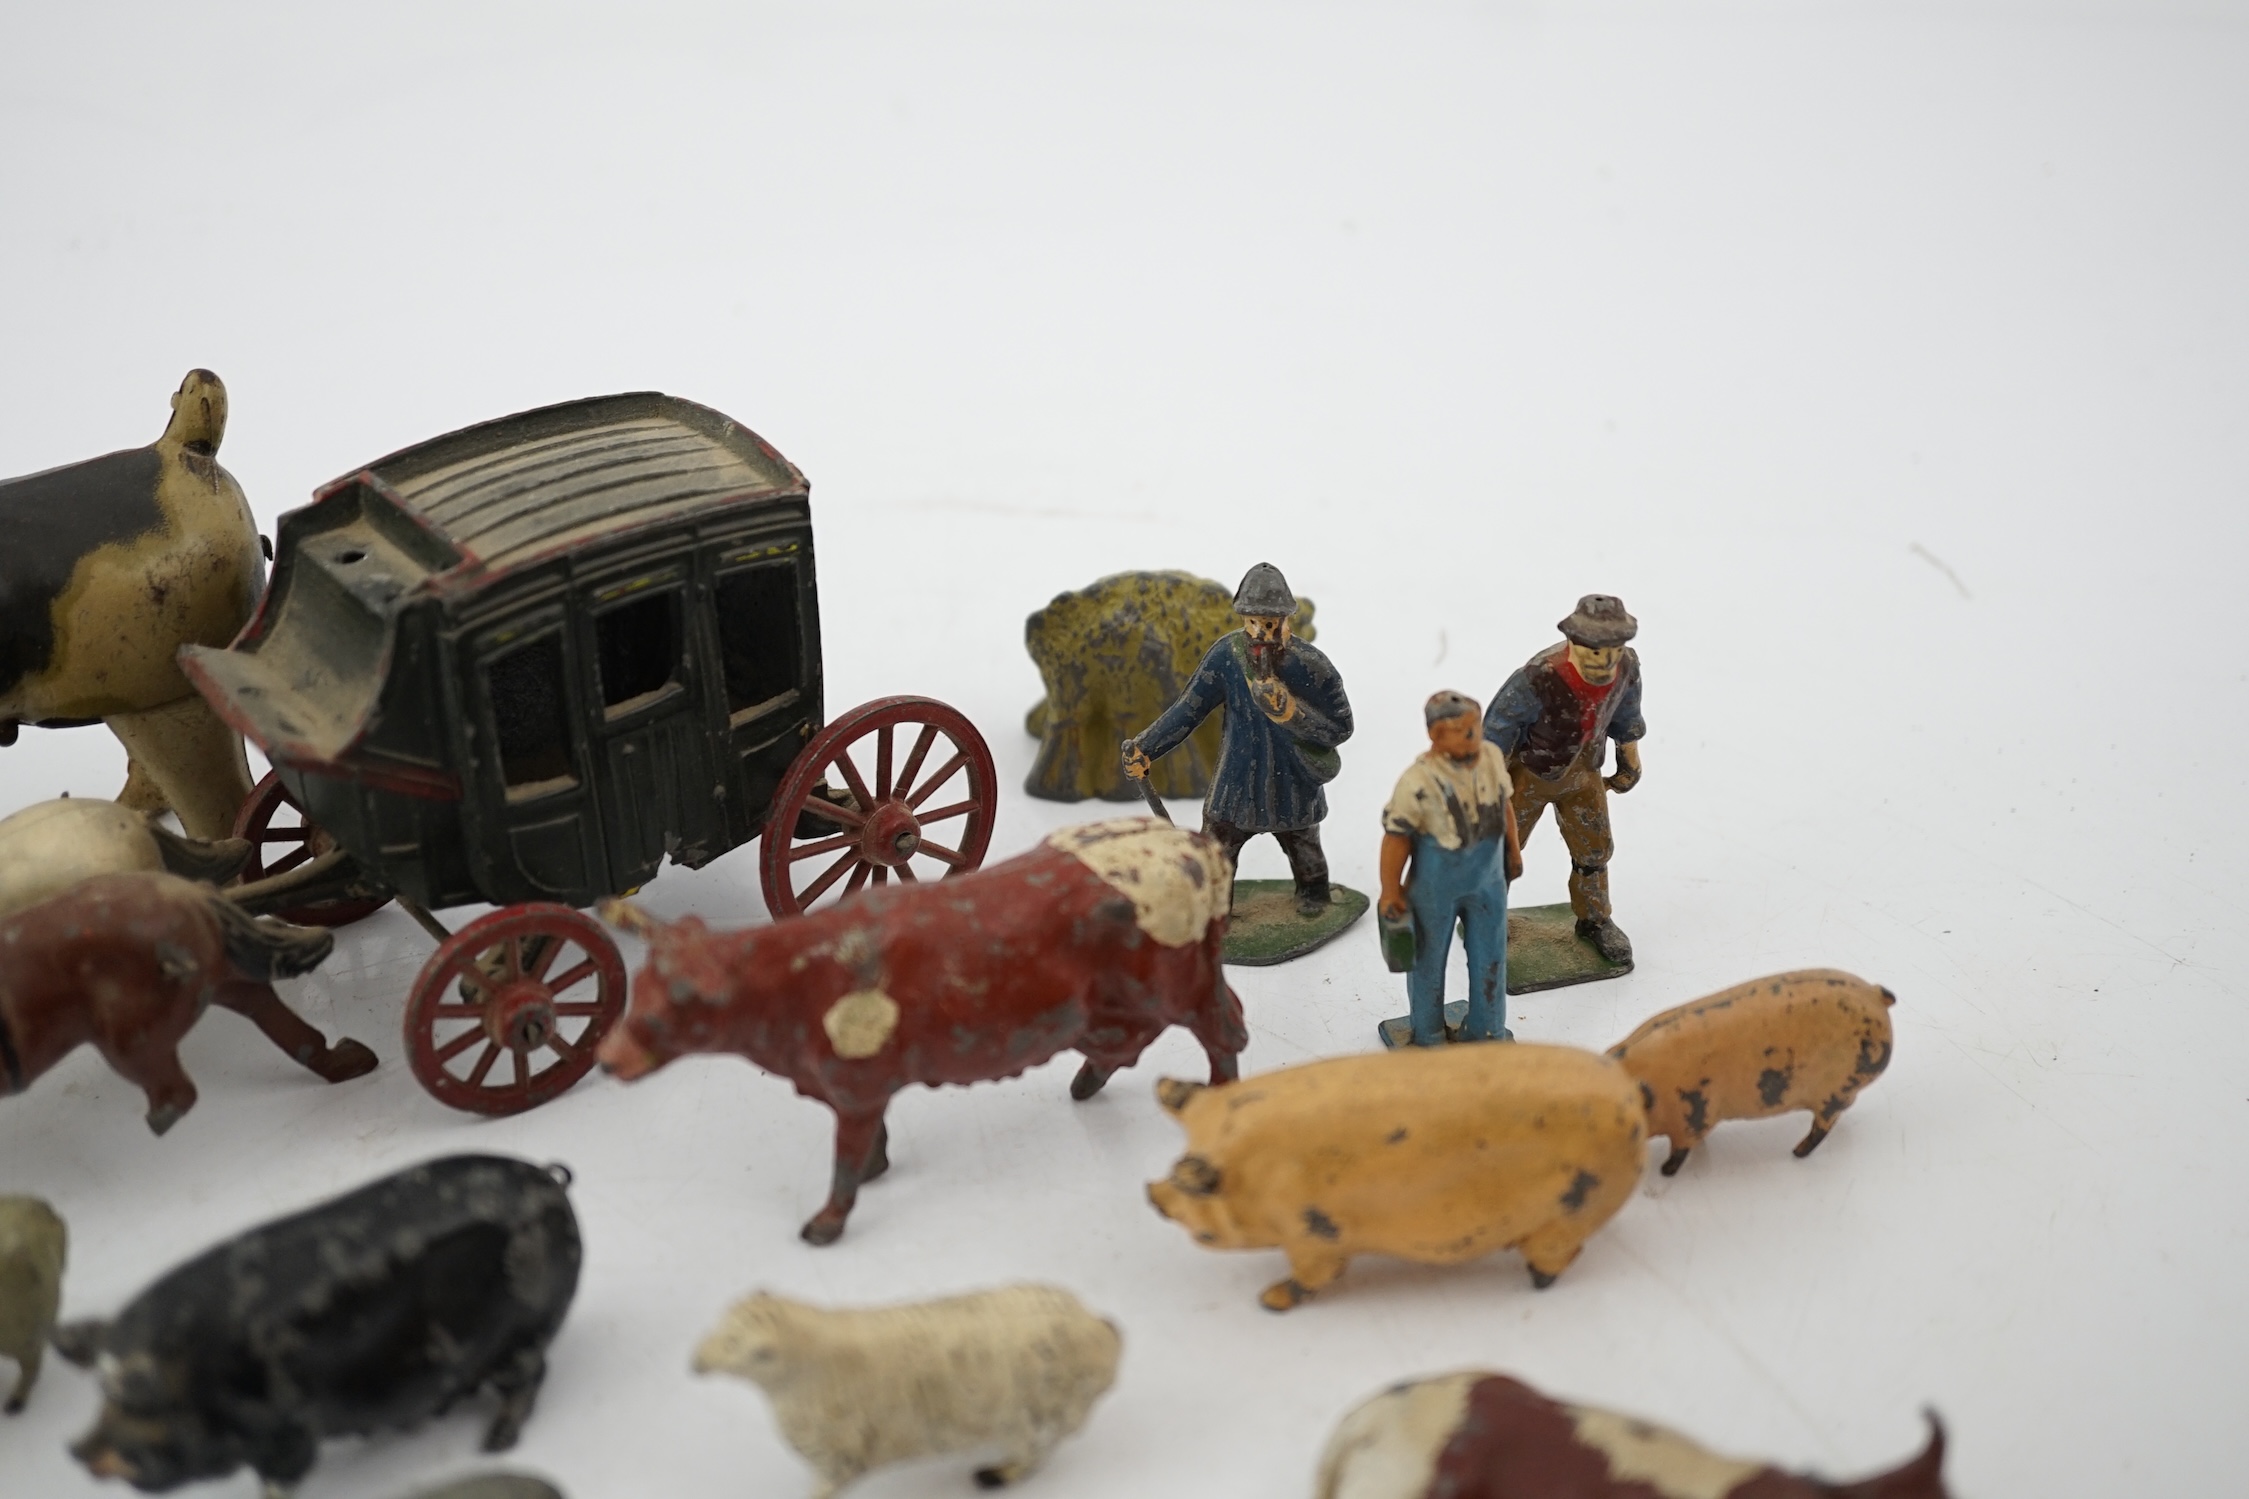 A collection of Britains, etc. lead farm animals and accessories, including the farmer, farmer’s wife, a coach and horses and other figures